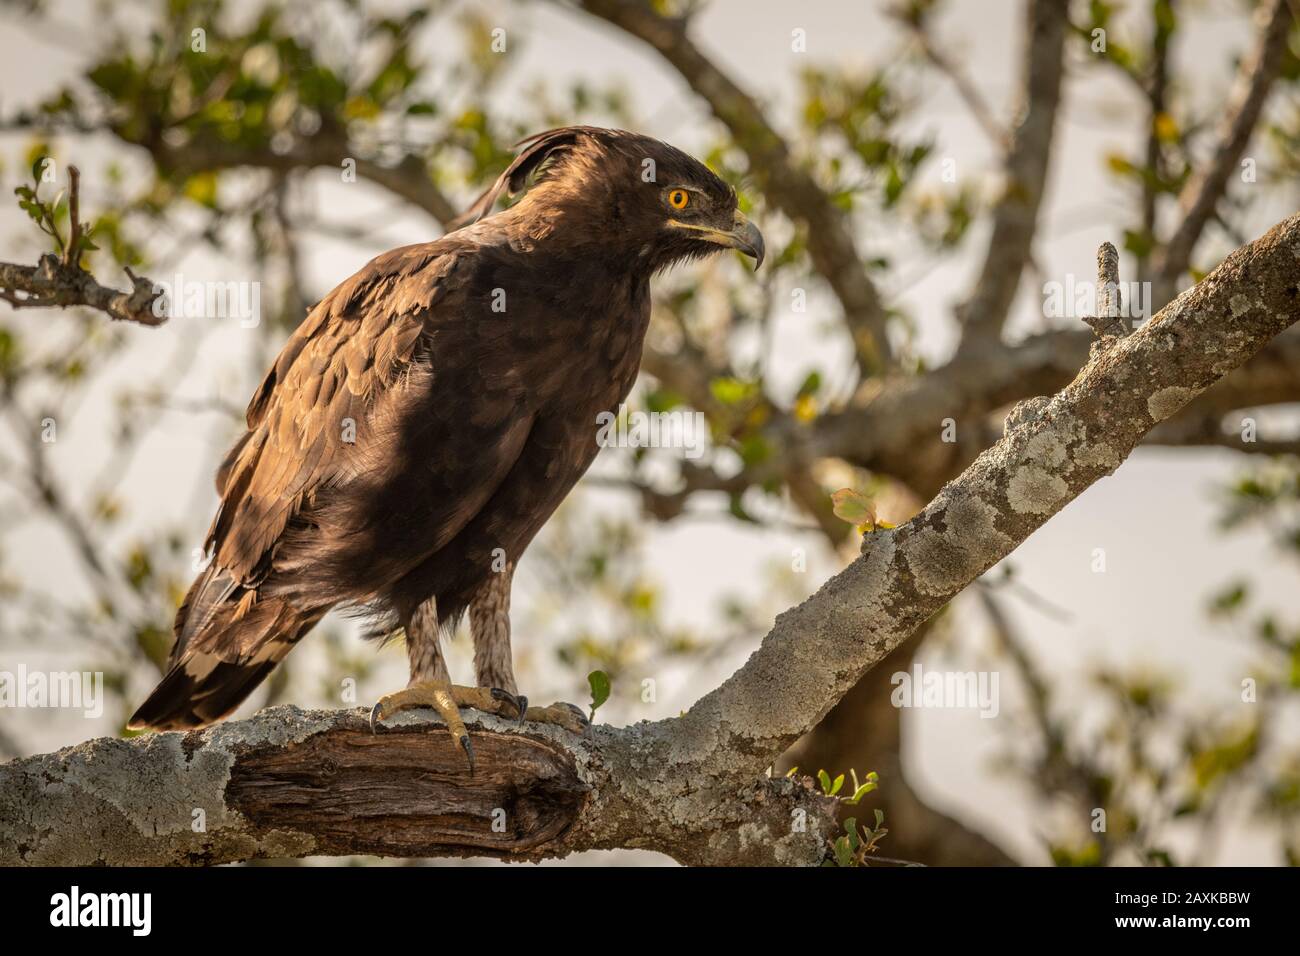 Long-crested eagle looks down from lichen-covered branch Stock Photo